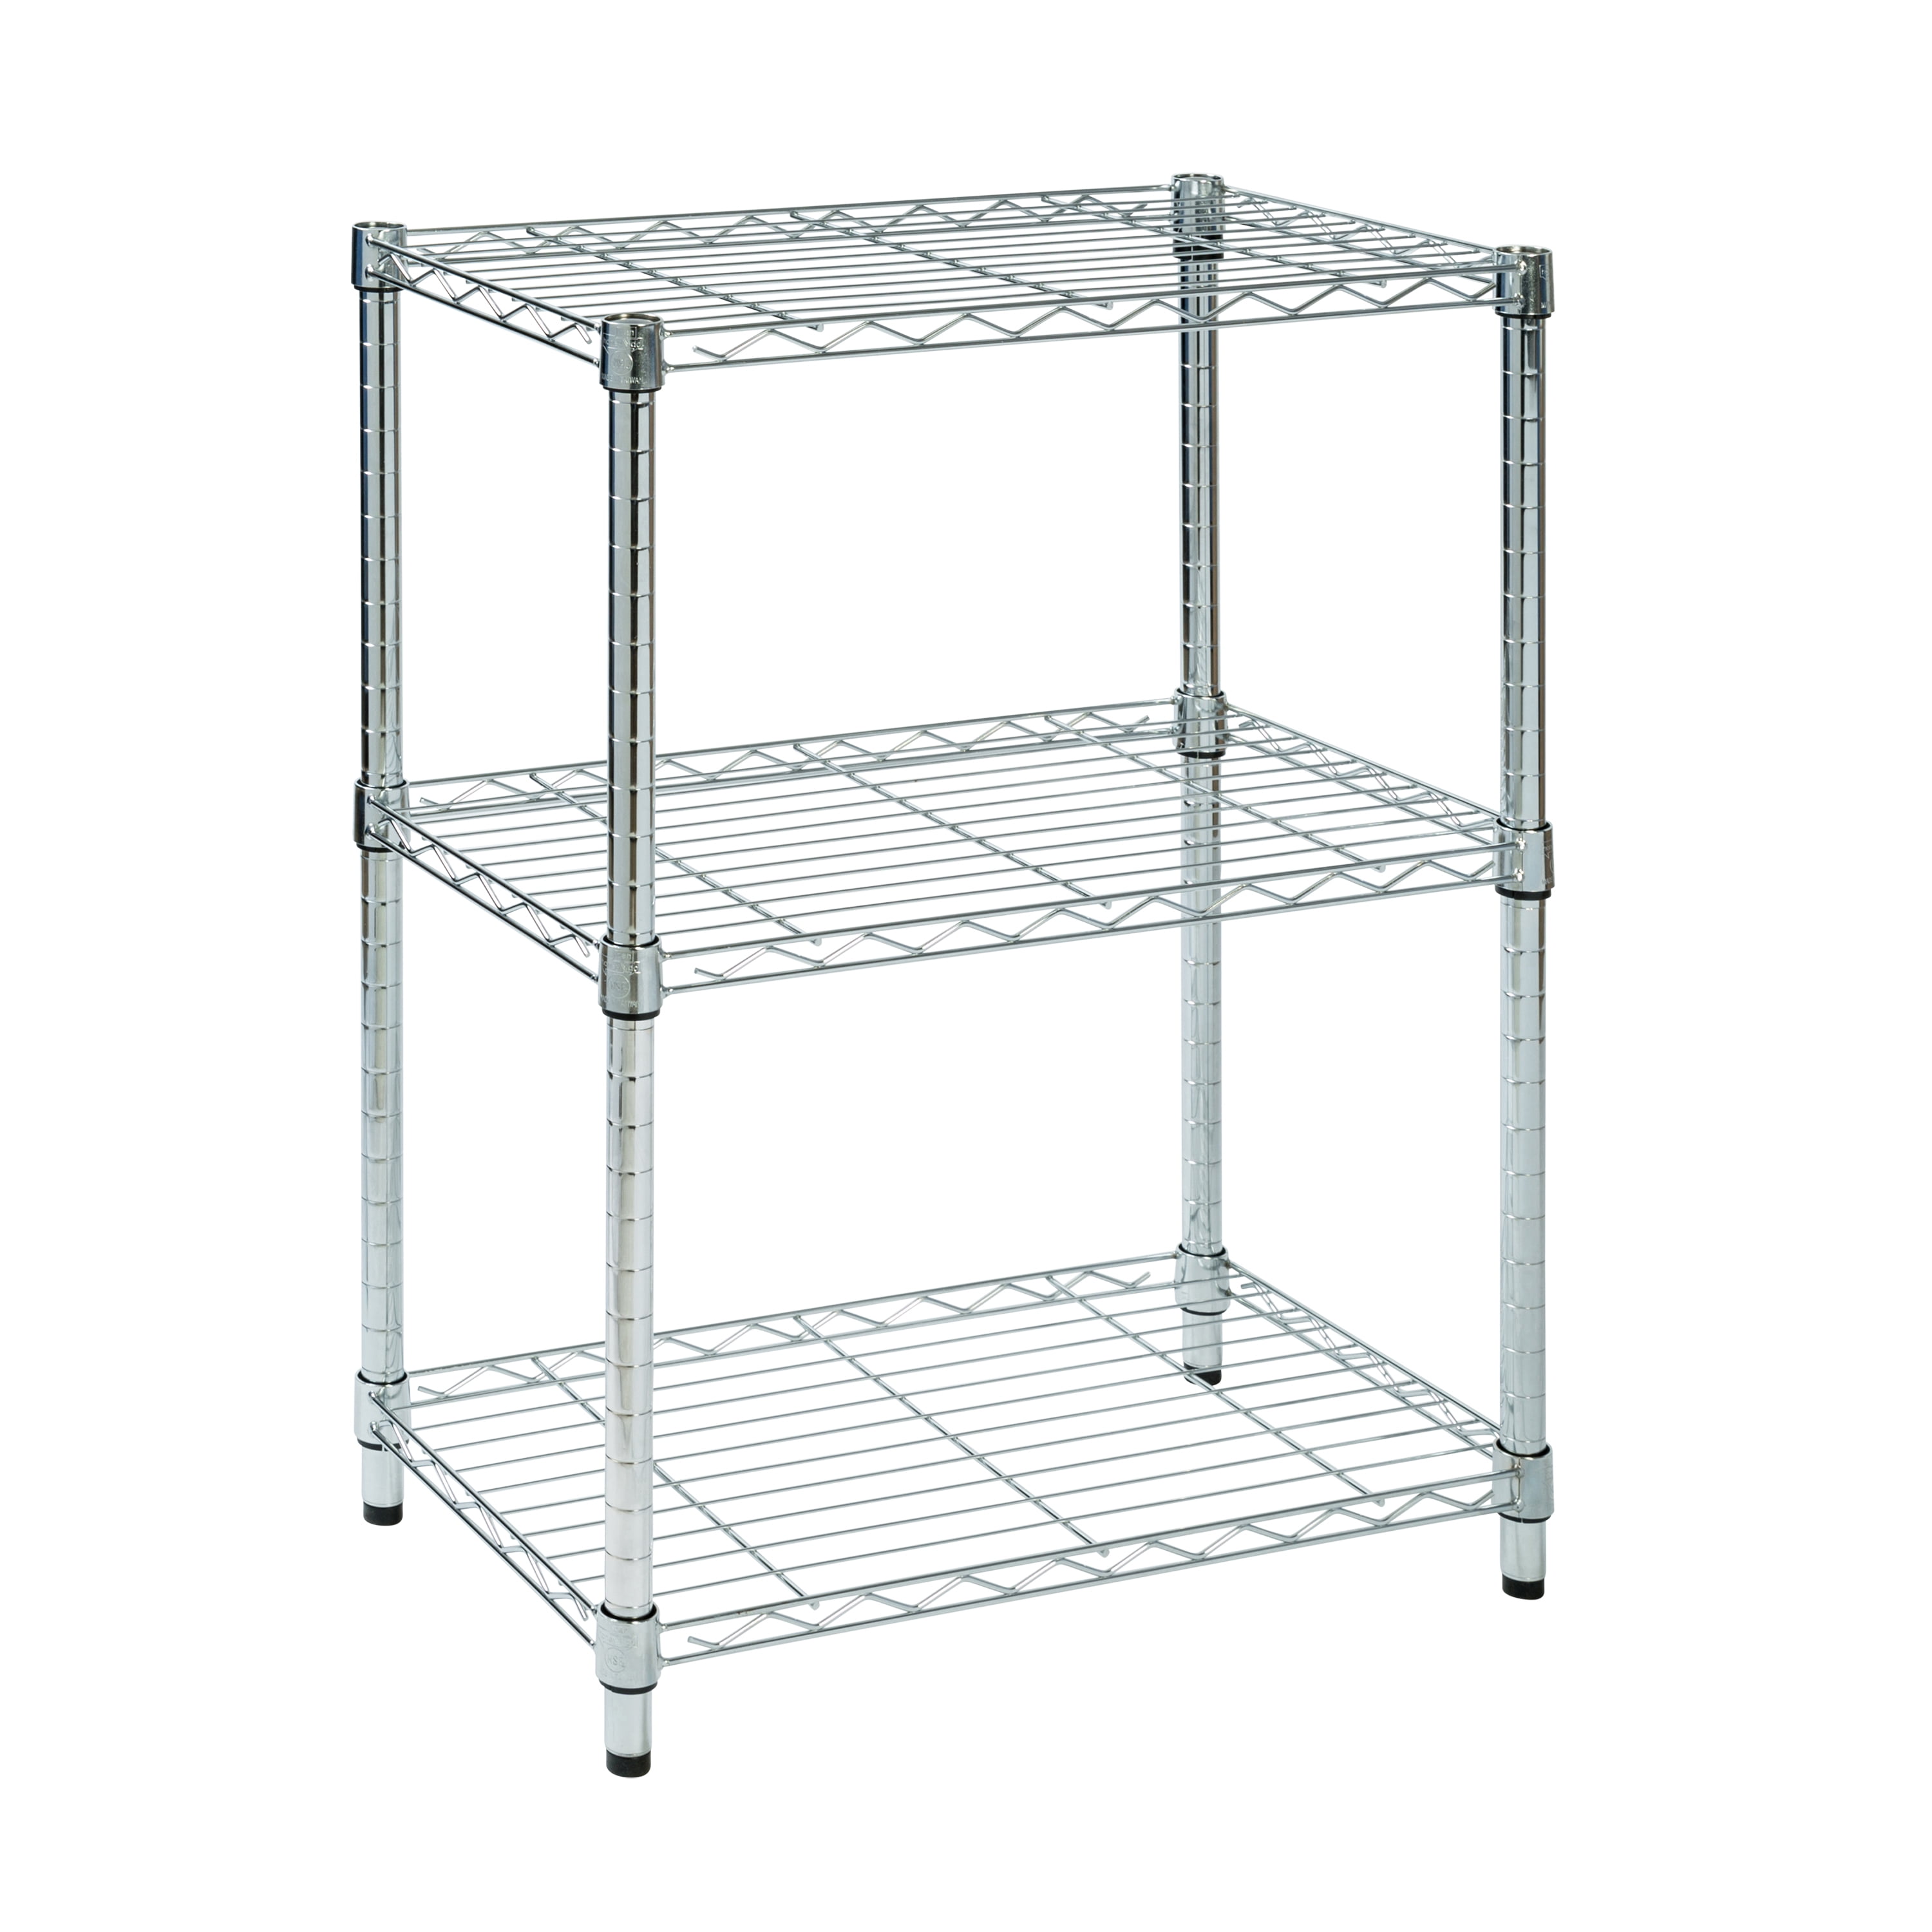 STAINLESS STEEL SHELVES 350 DEEP SIZES FROM 300 TO 1000. 